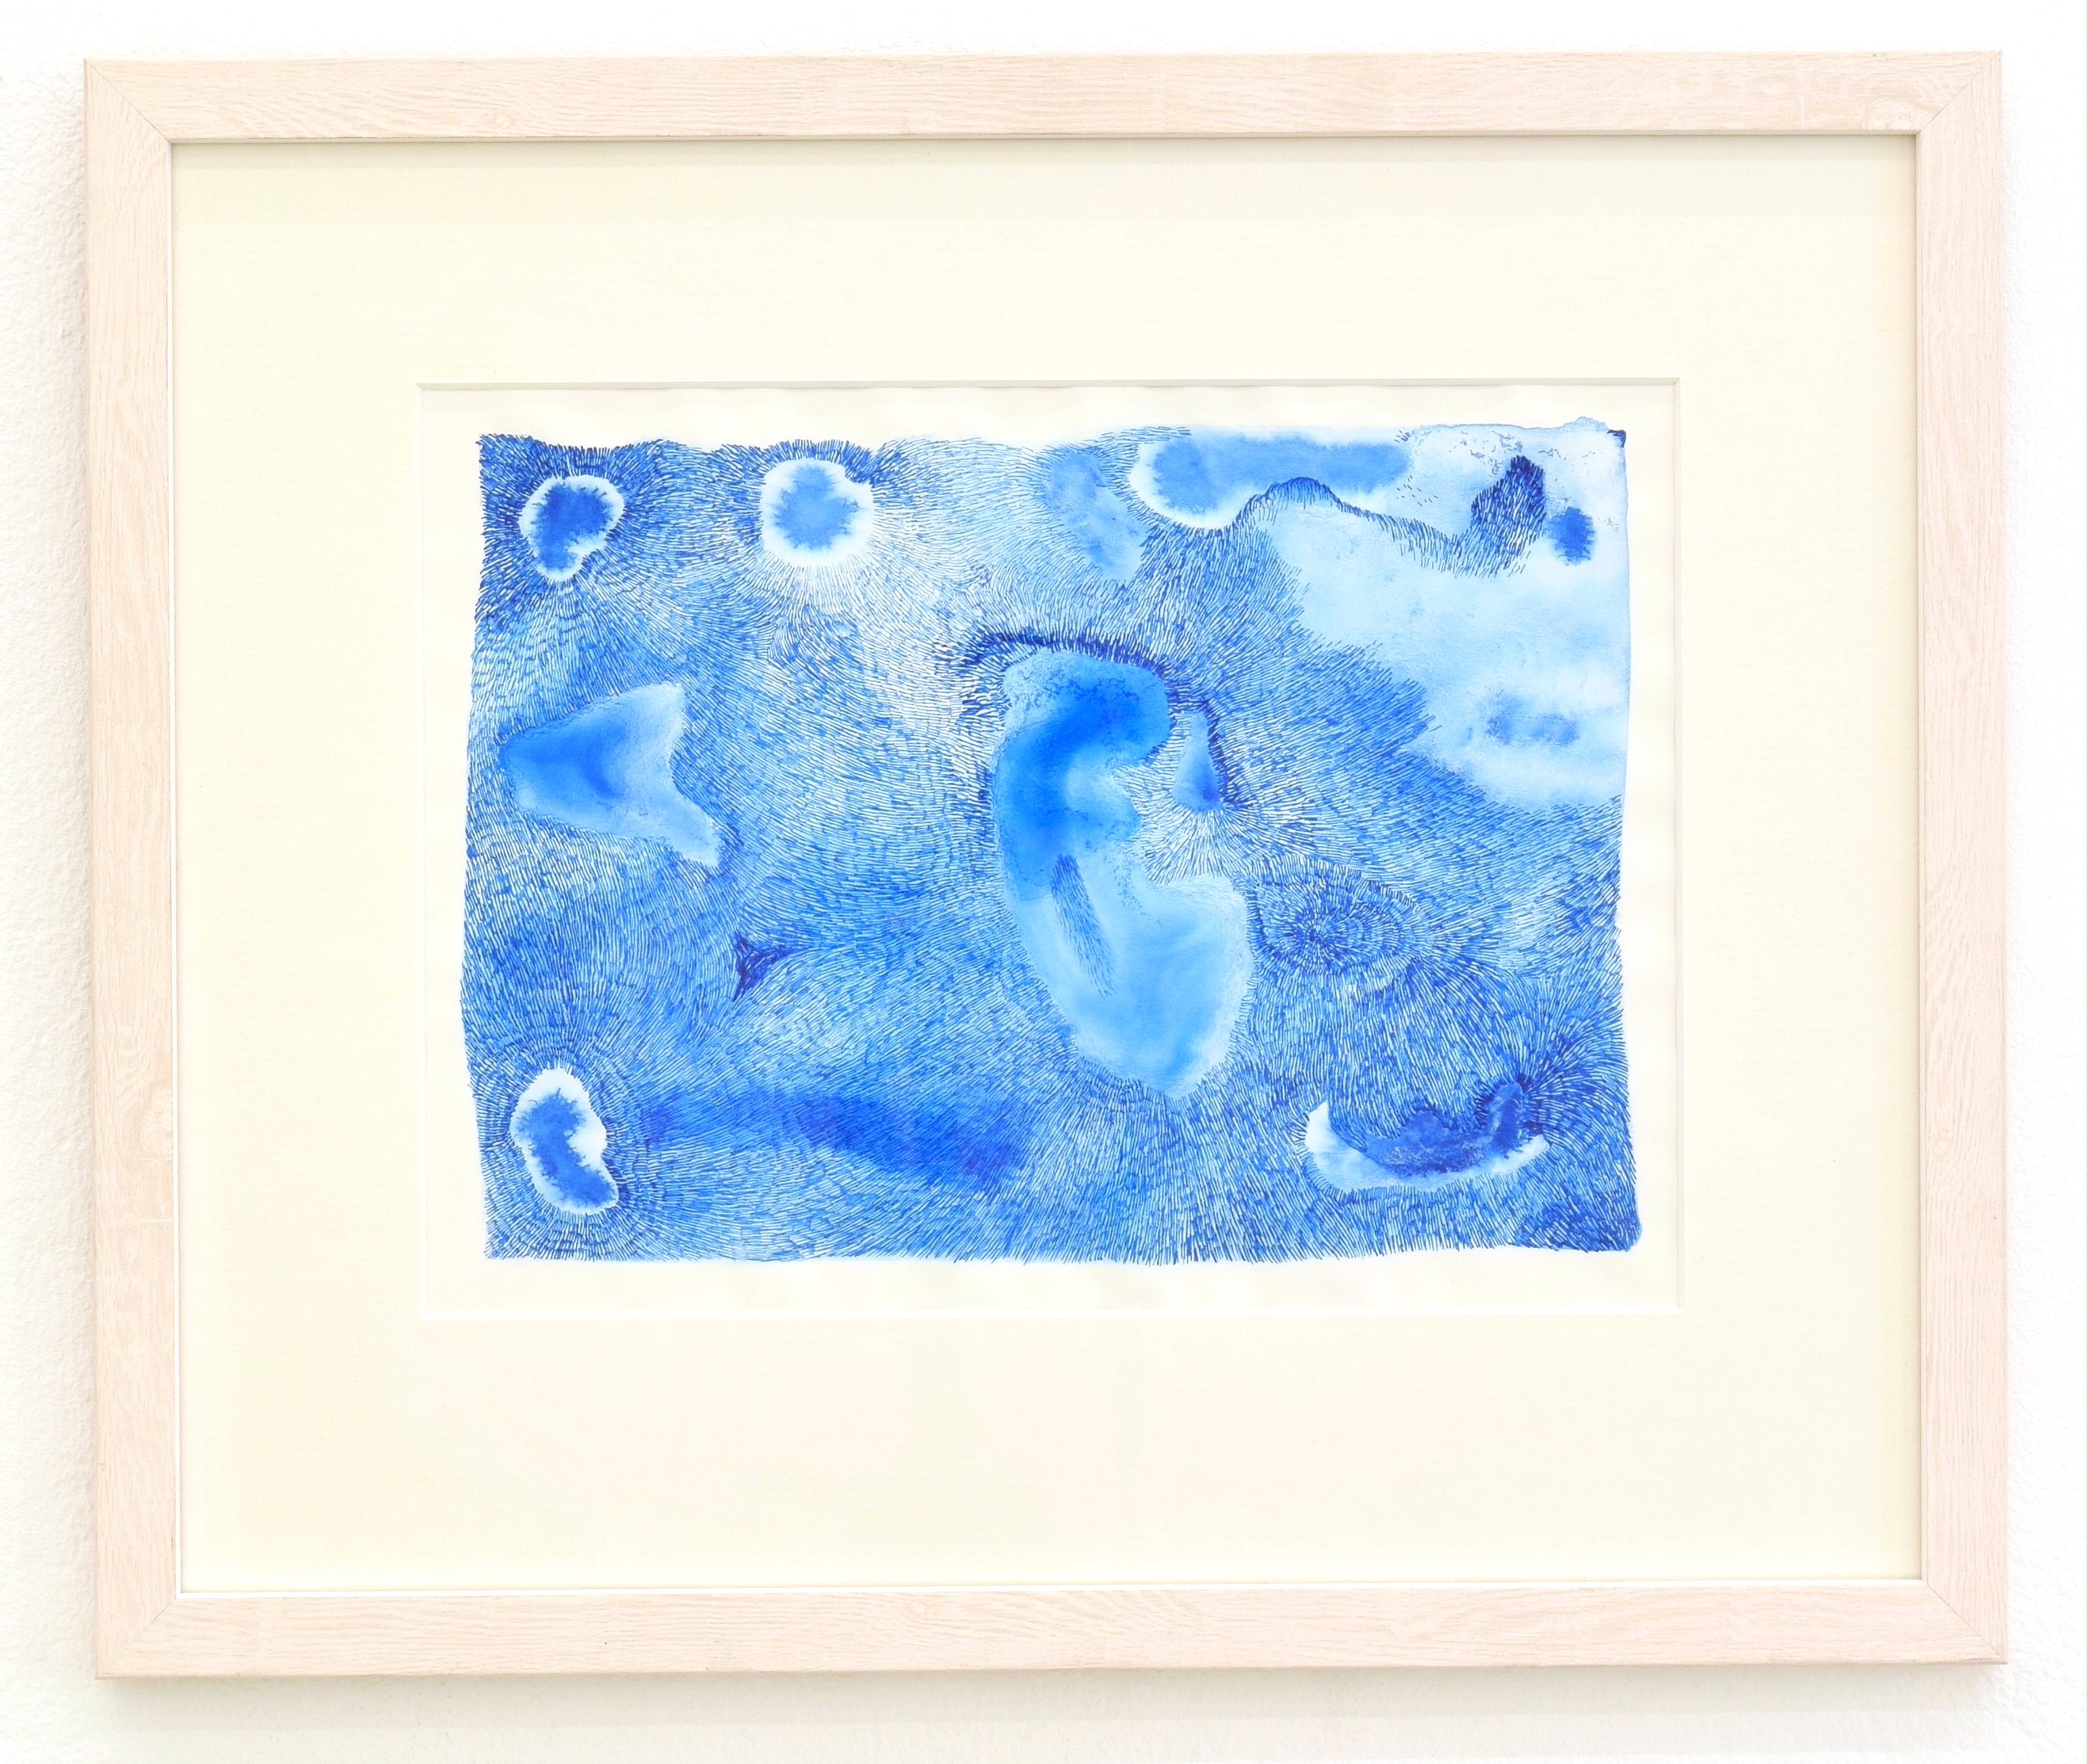 Kenji Lim
Holes in the Sea 1 - Contemporary Abstract Blue Landscape Painting
Ink on paper, framed
32 cm x 39 cm
Unique copy

Kenji Lim is mostly interested in culture, myth, and ecosystems. Land holds stories like a sponge holds water. Or vinegar